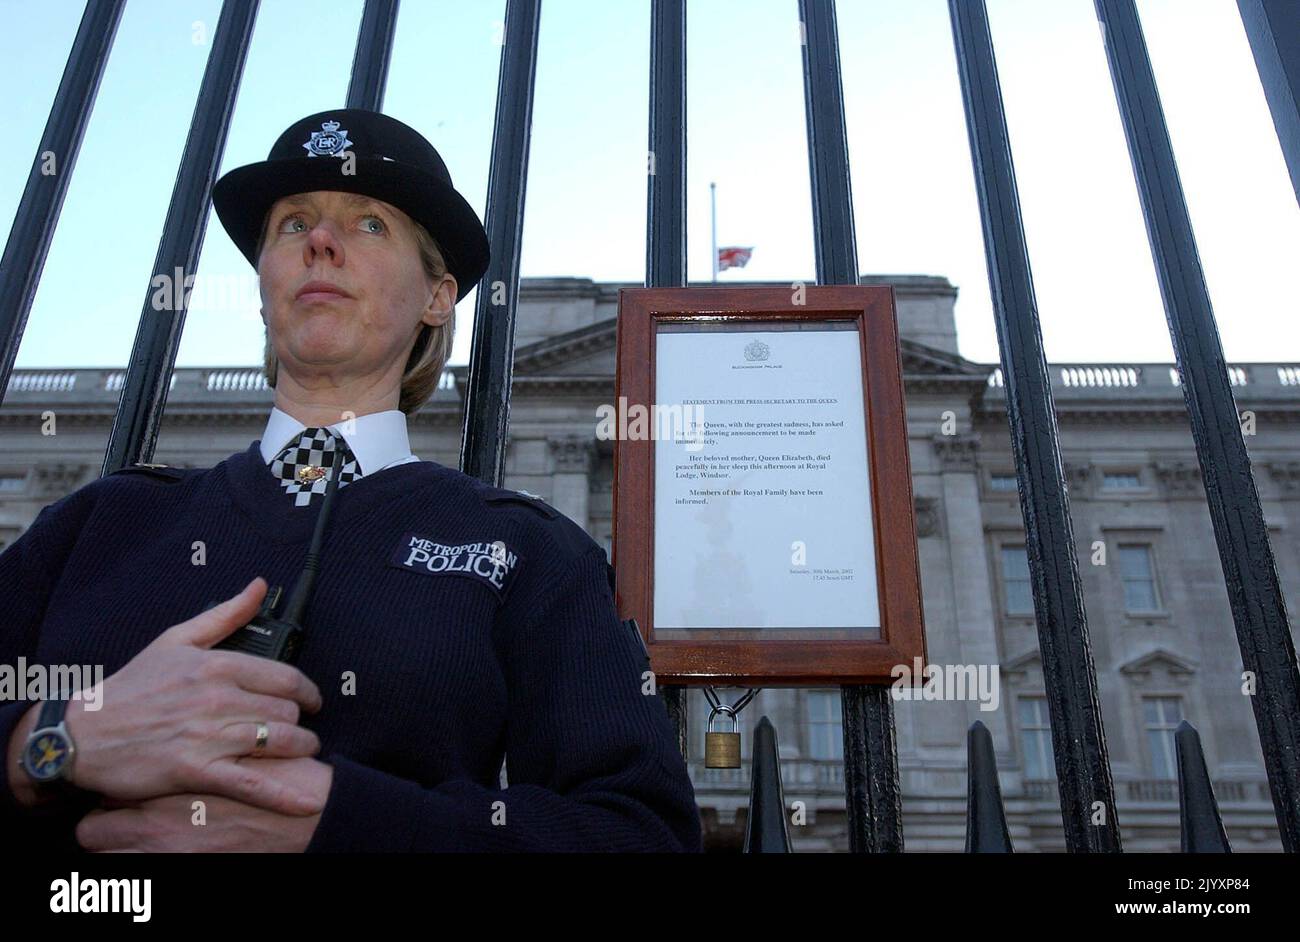 File photo dated 30/3/2002 of a police officer standing next to the announcement of the death of the Queen Mother as the Union flag flies at half mast over Buckingham Palace. Royal deaths are usually confirmed with the age-old tradition of placing a notice on show at Buckingham Palace and at other royal residences. Issue date: Thursday September 8, 2022. Stock Photo